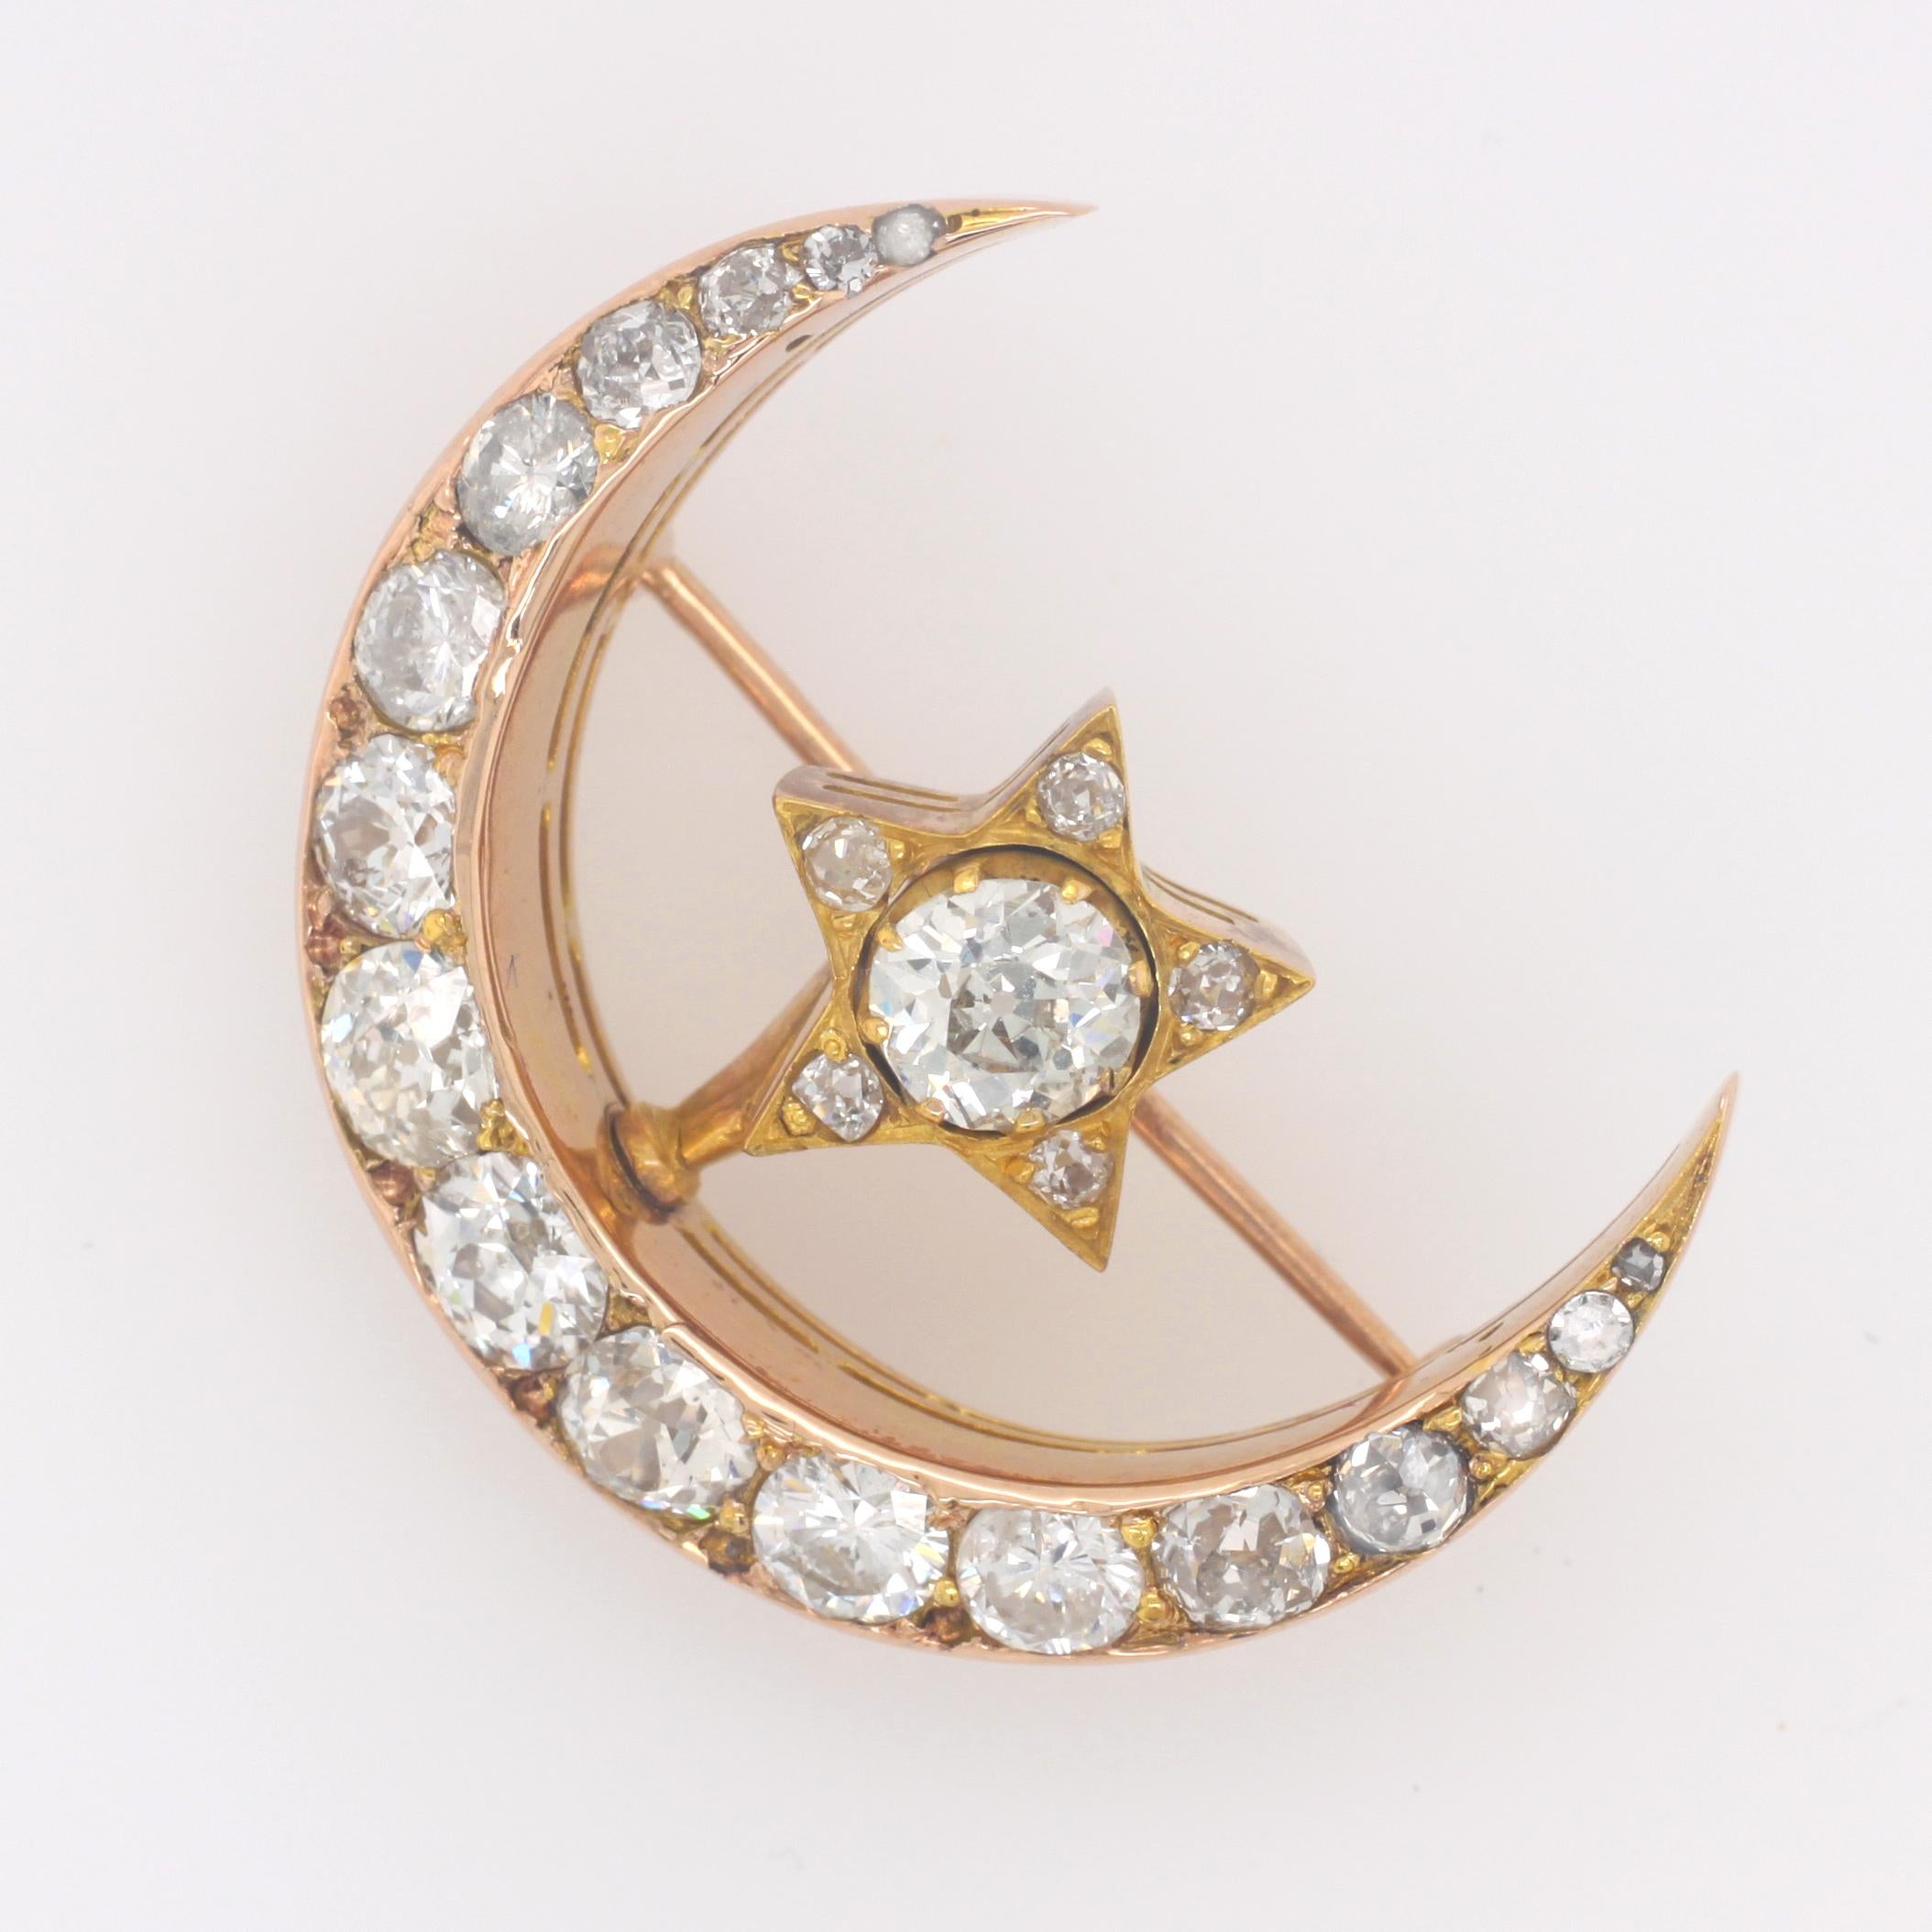 A Russian diamond crescent and star brooch in yellow gold, 19th Century. This beautiful piece carries a strong symbolism - the crescent moon symbolising love and affection and the star giving guidance and direction.This brooch, which can be easily